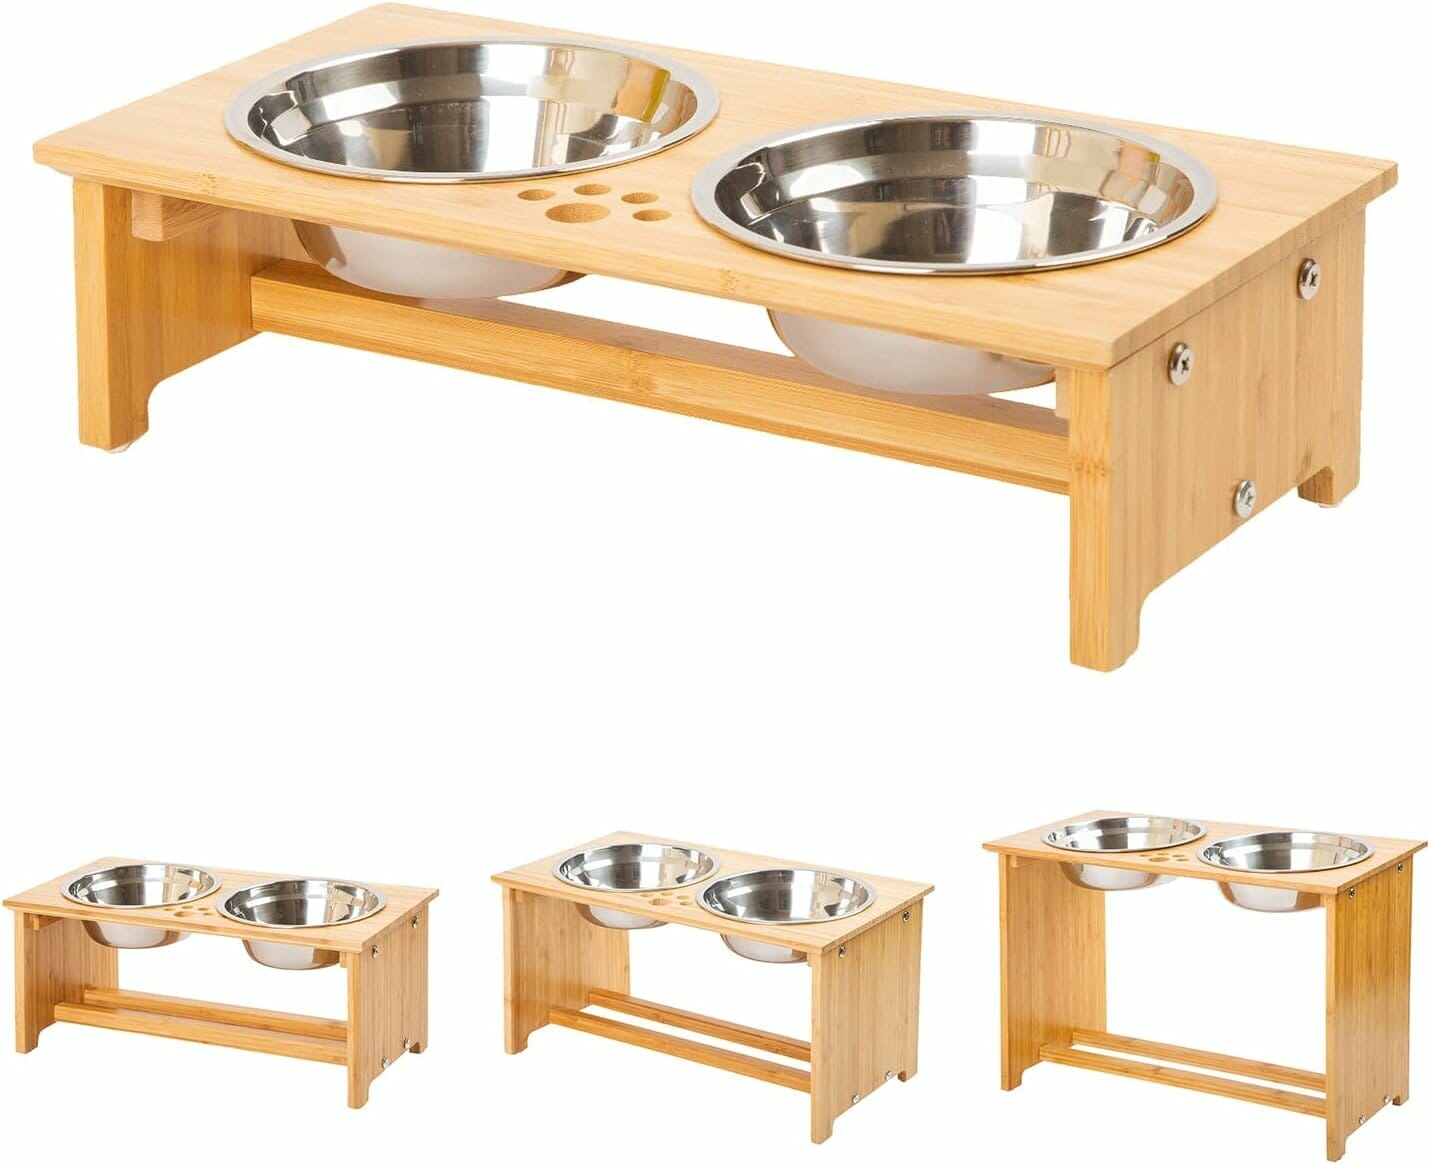 FOREYY Raised Pet Bowls Review